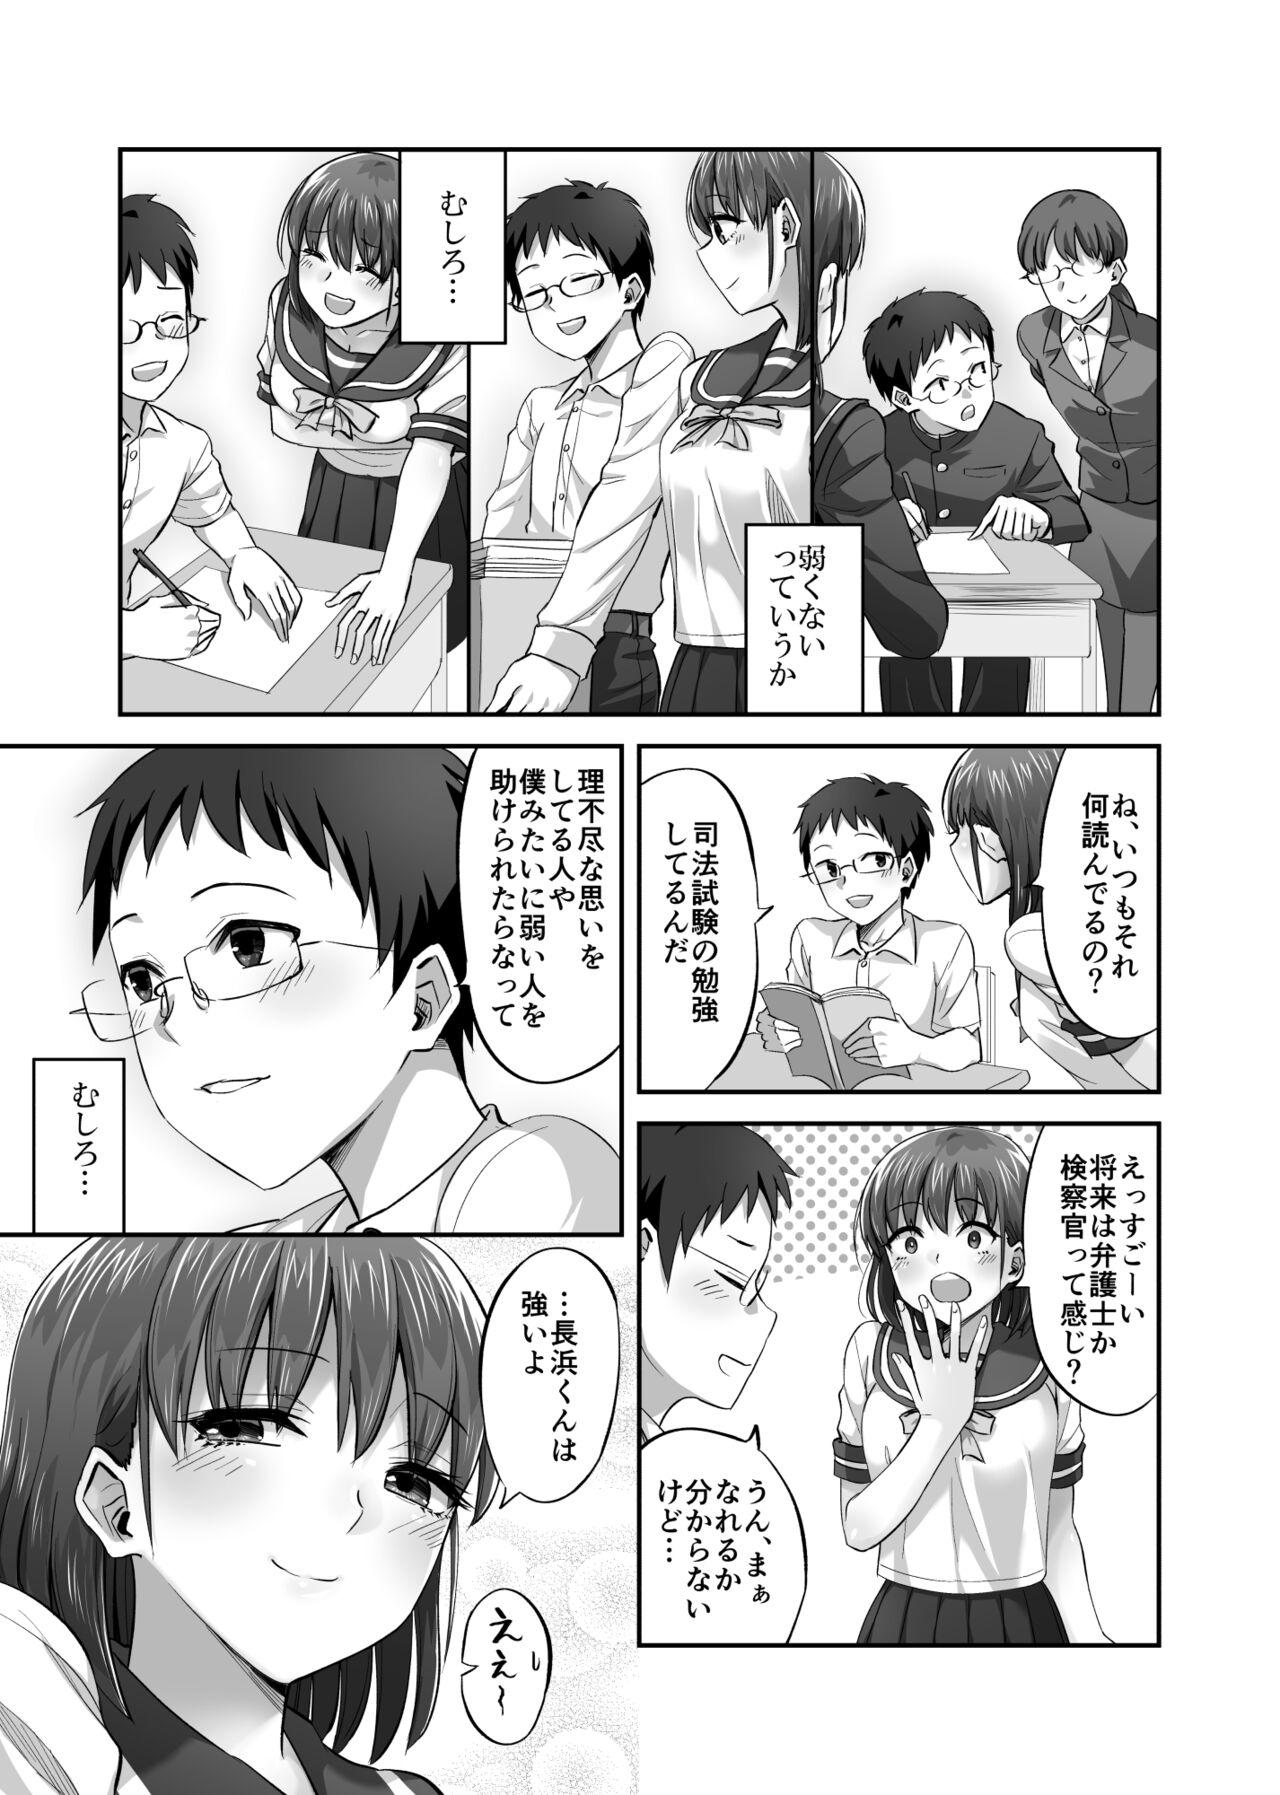 Lovers 僕を理解してくれるあの子が僕をいじめるあいつにヤり捨てられていた話 - Original Real Orgasms - Page 6